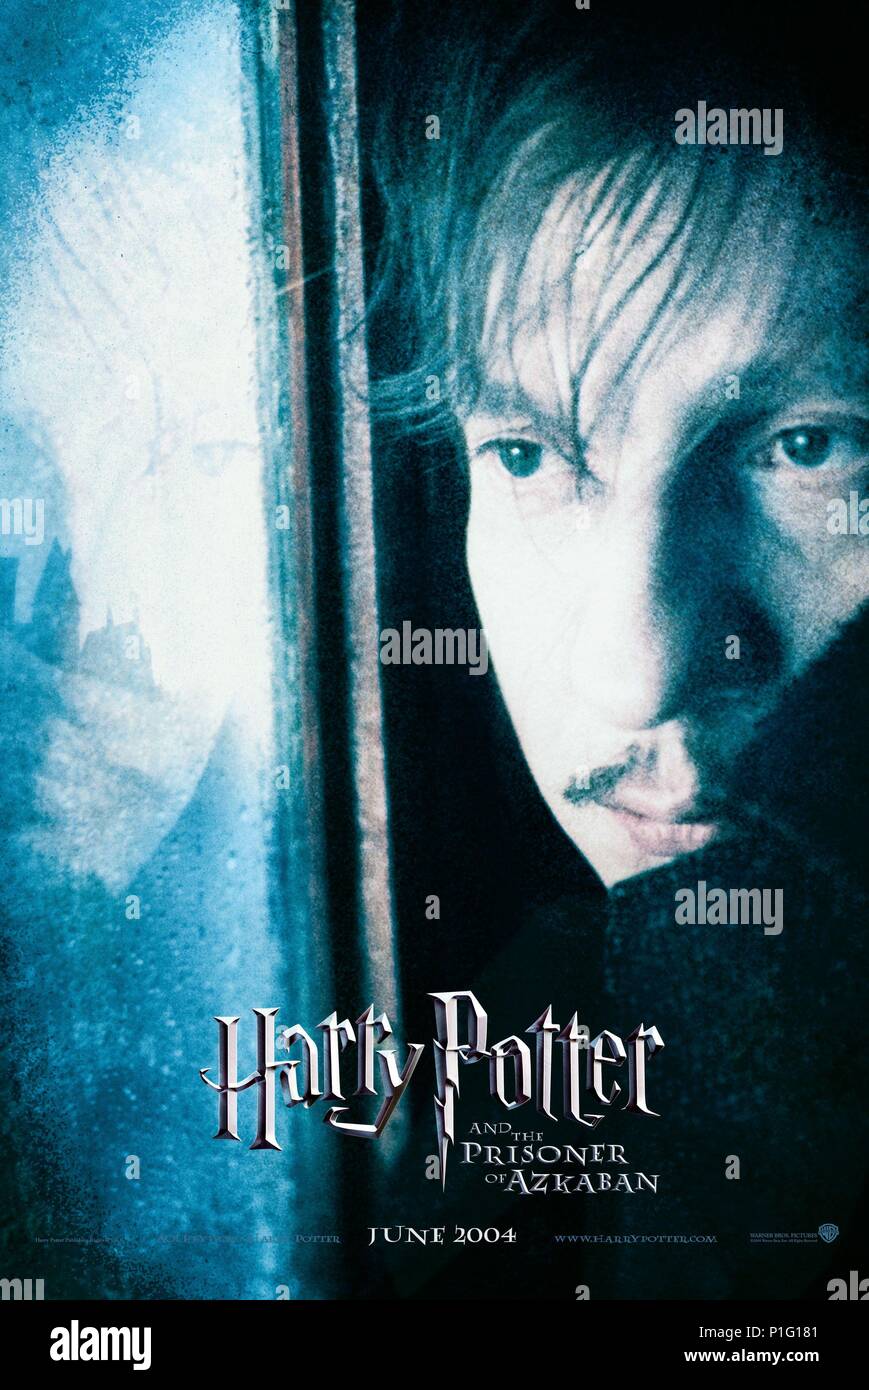 Original Film Title: HARRY POTTER AND THE PRISONER OF AZKABAN.  English Title: HARRY POTTER AND THE PRISONER OF AZKABAN.  Film Director: ALFONSO CUARON.  Year: 2004.  Stars: DAVID THEWLIS. Credit: WARNER BROS. PICTURES / Album Stock Photo